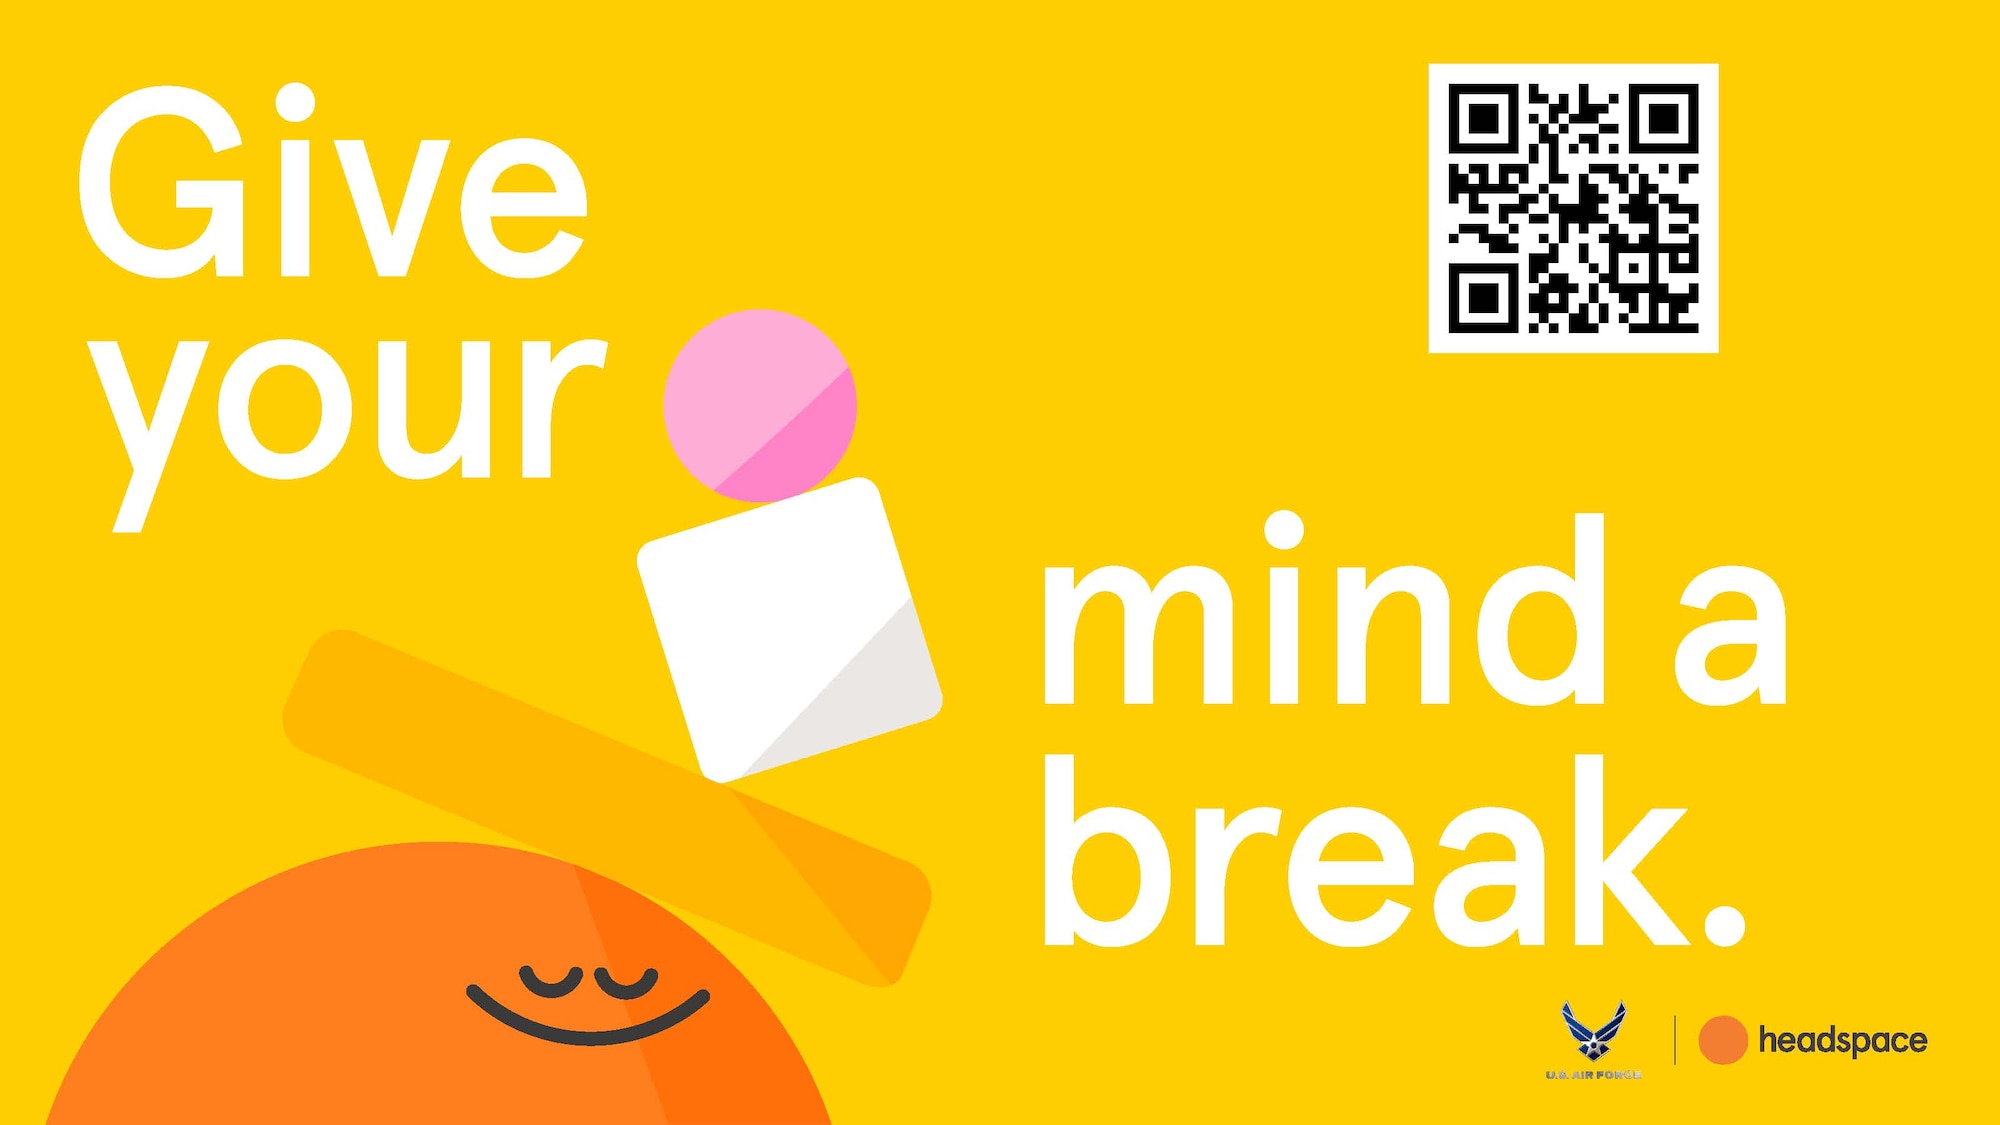 Headspace app offers mindfulness; scan QR code for free trial